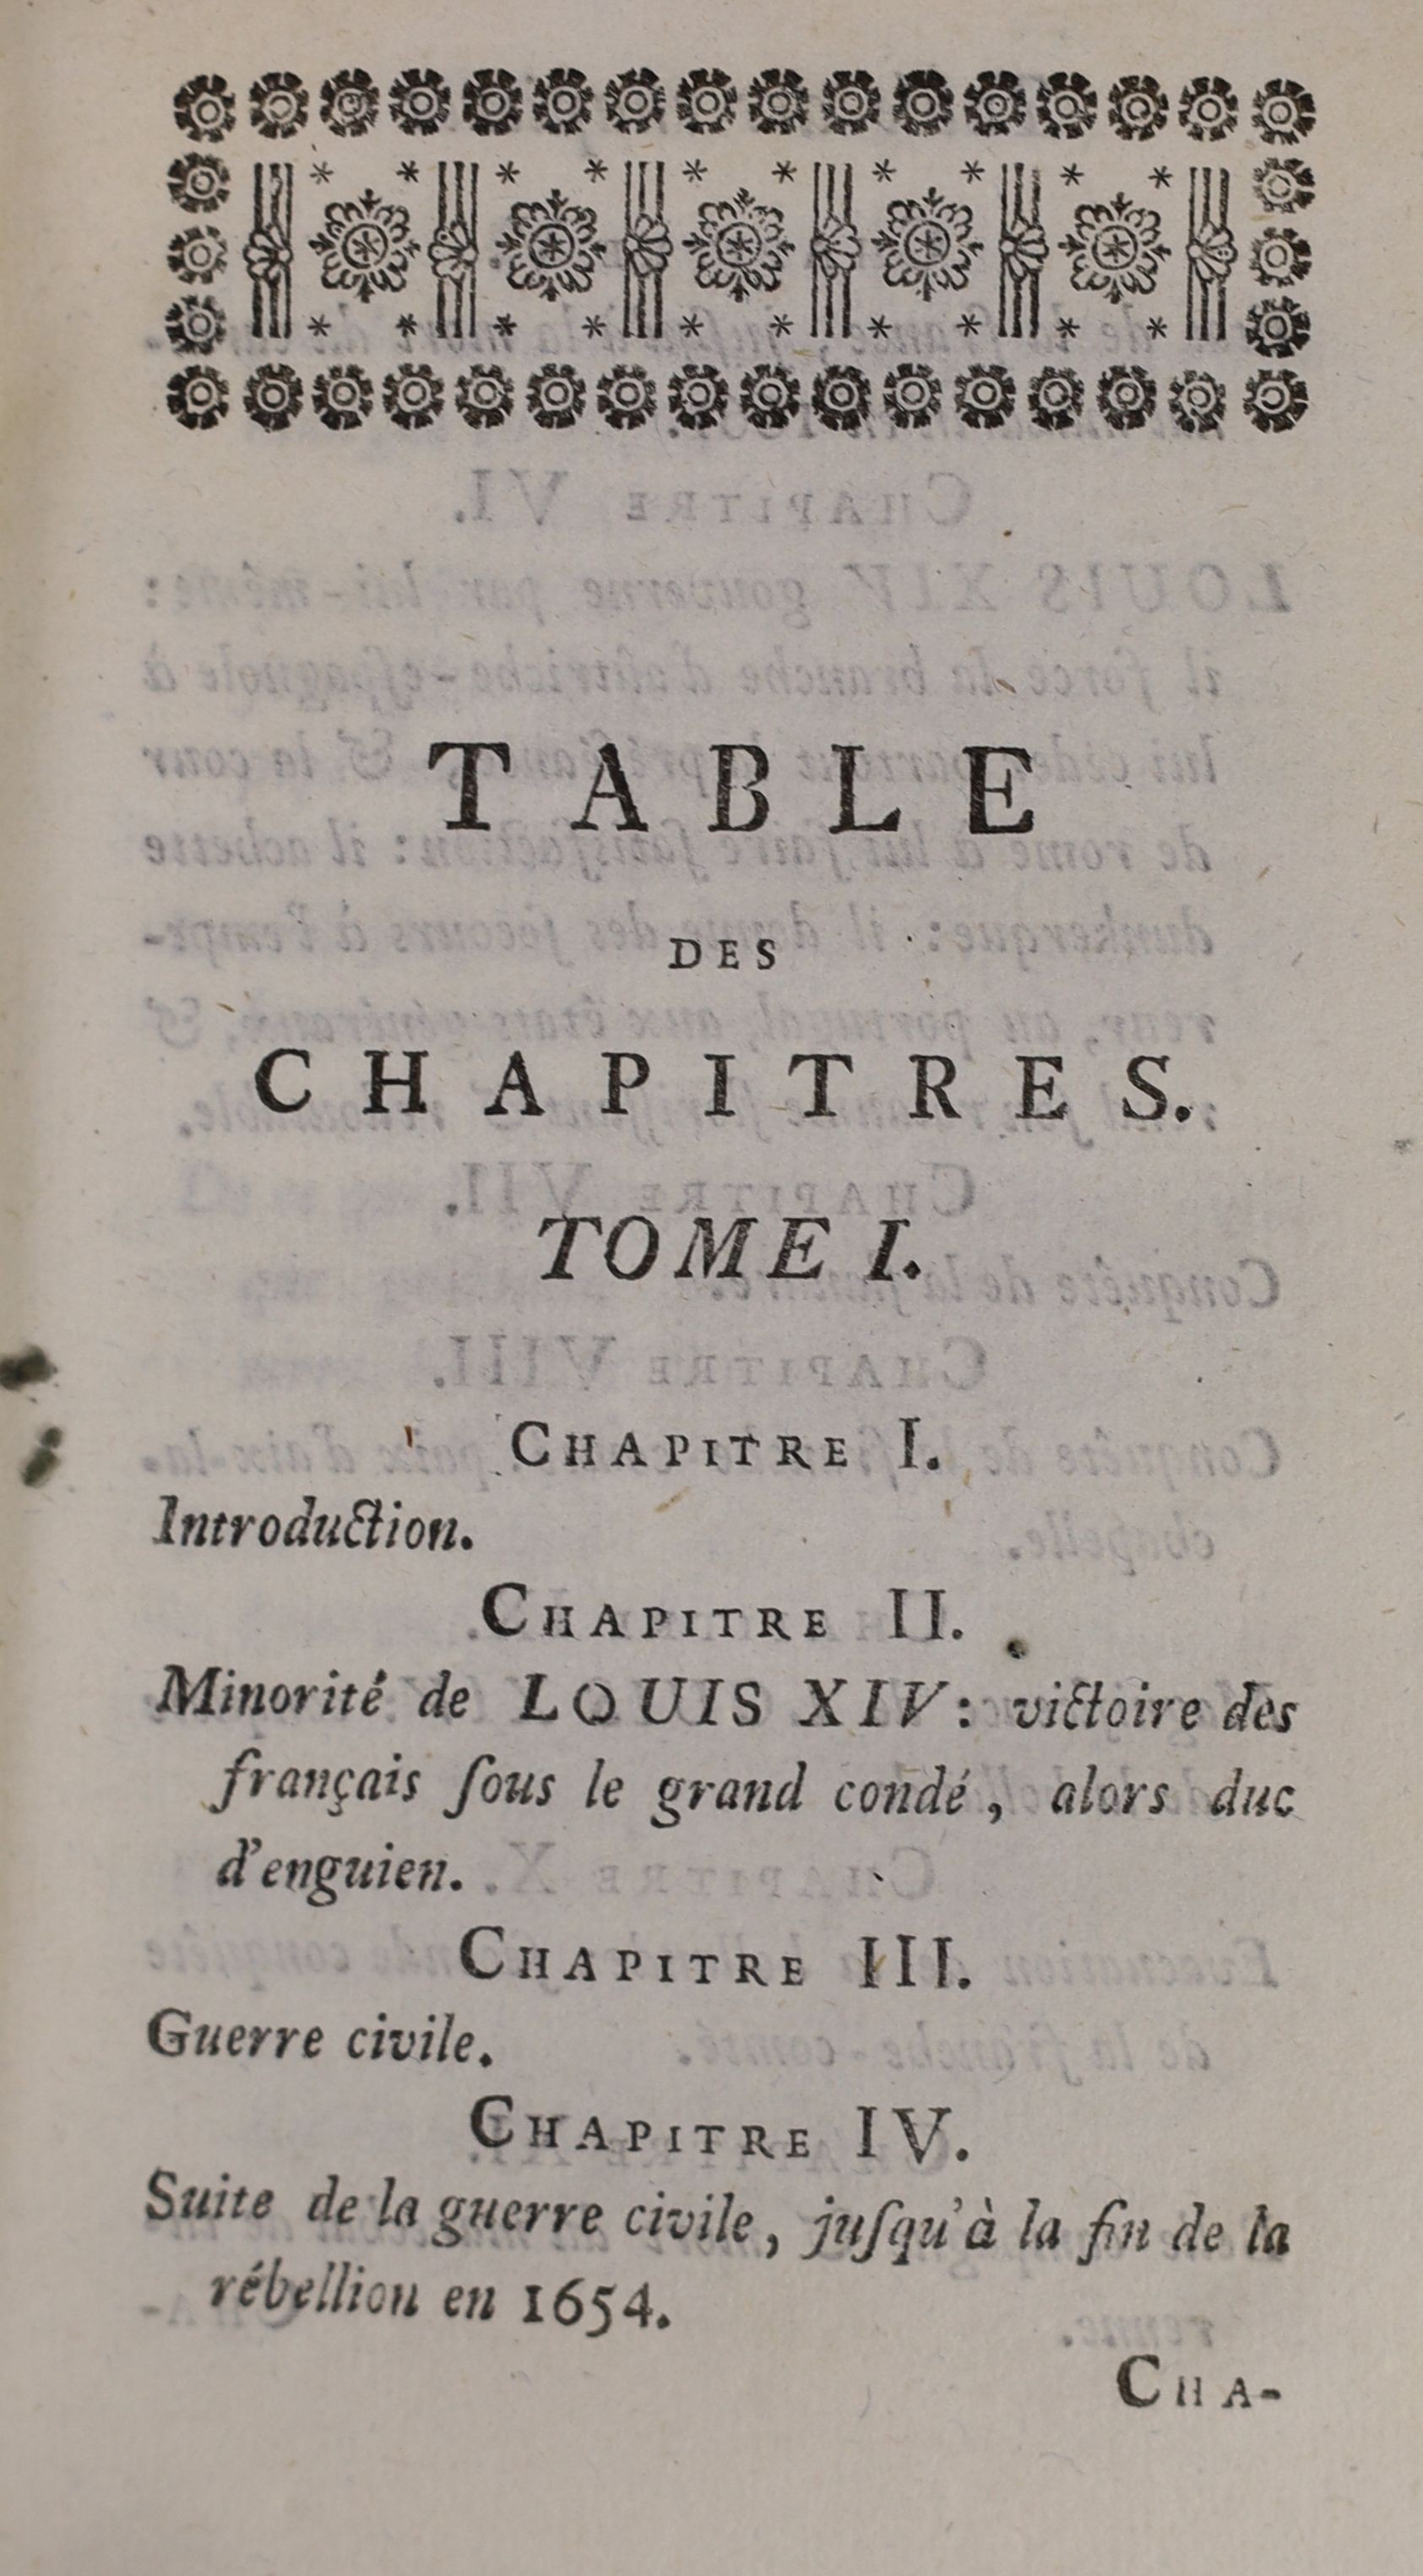 Voltaire, Francois Marie Arouet de, - Le Siecle de Louis XIV, 1st edition, 2vols, 12mo, calf, C.F. Henning, Berlin, 1751, Note: Under the pseudonym of M. de Francheville, whilst at the court of King Frederick II of Pruss